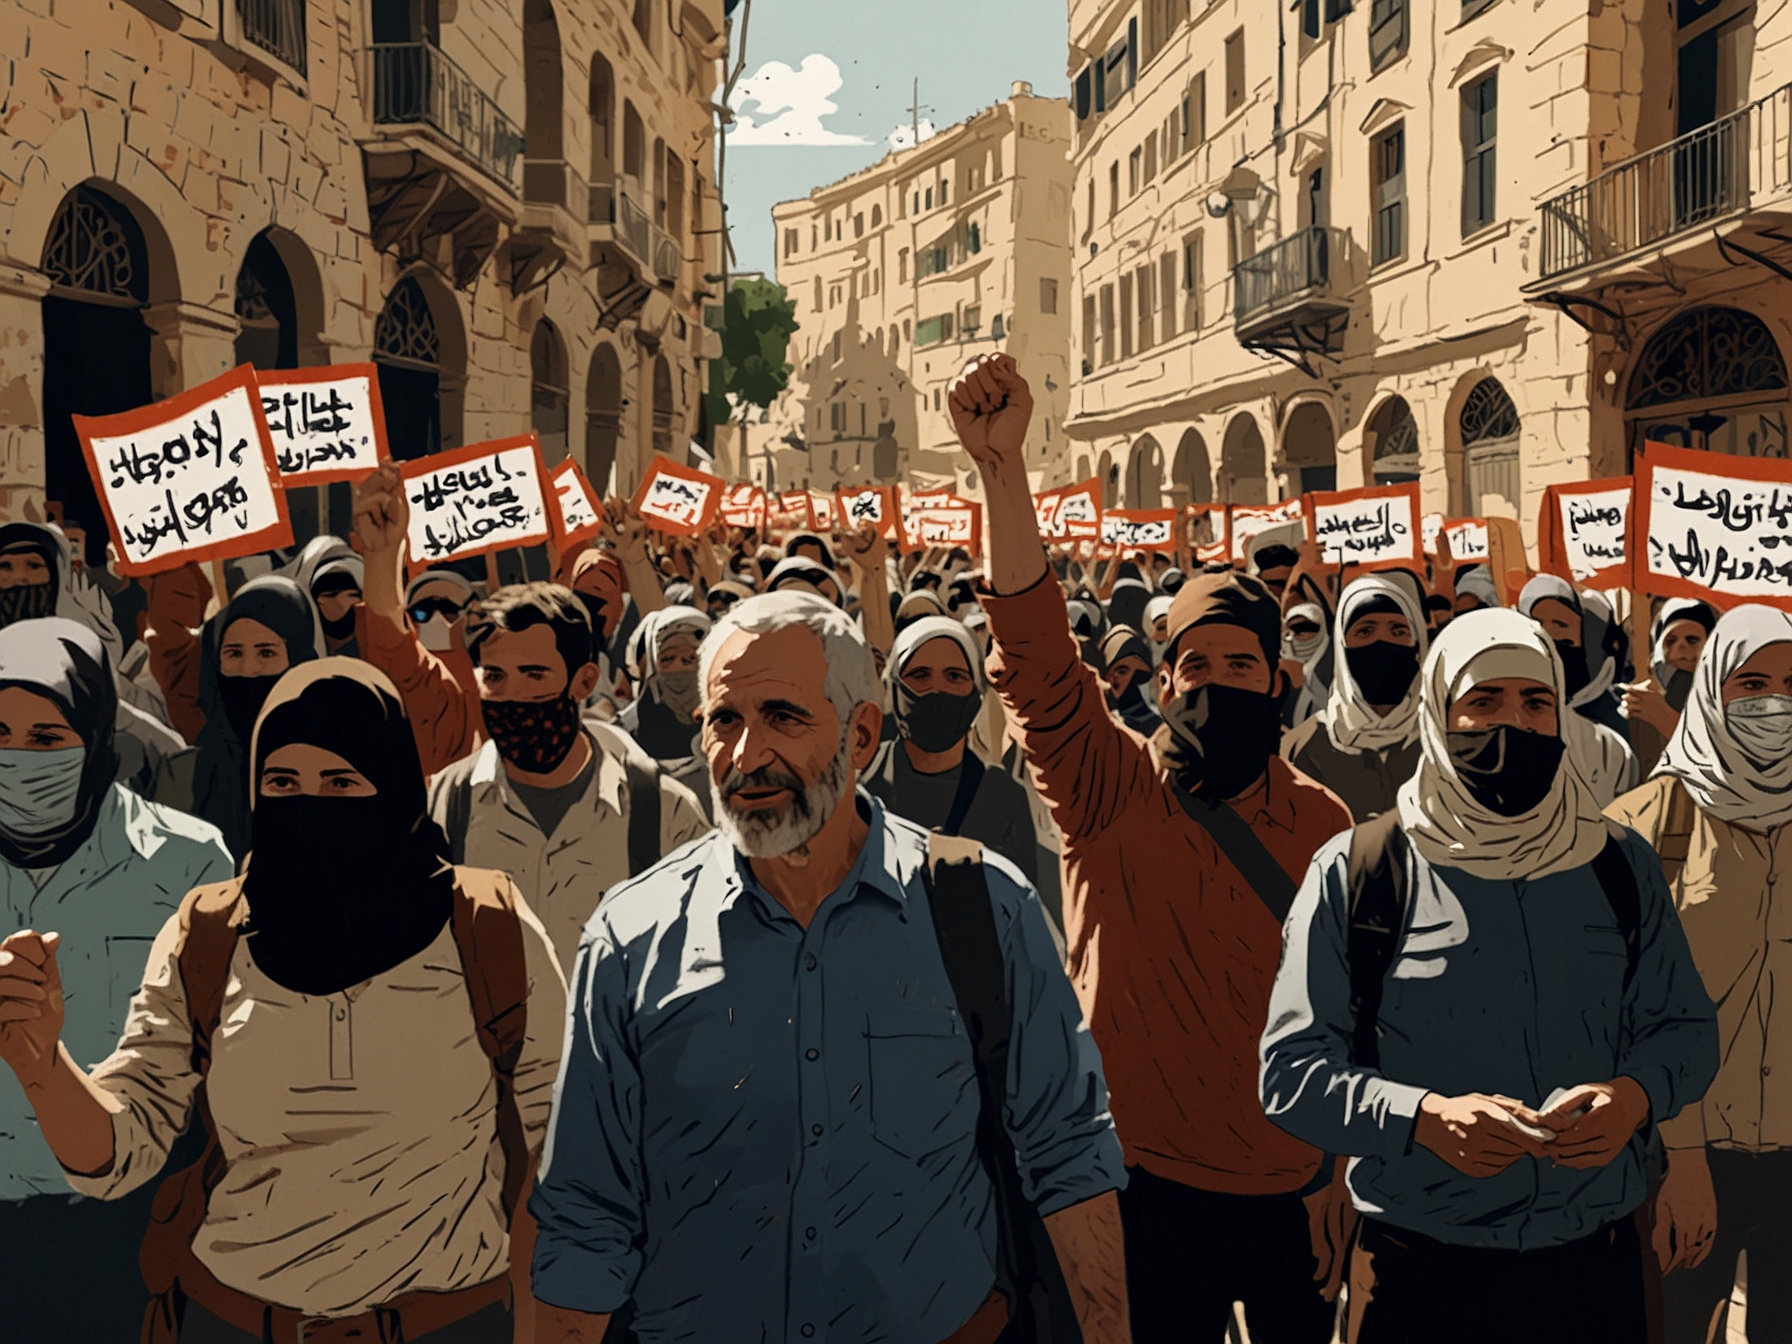 A large crowd of protesters in the streets of Jerusalem, waving flags and holding signs demanding greater transparency and political reforms, symbolizing widespread discontent.